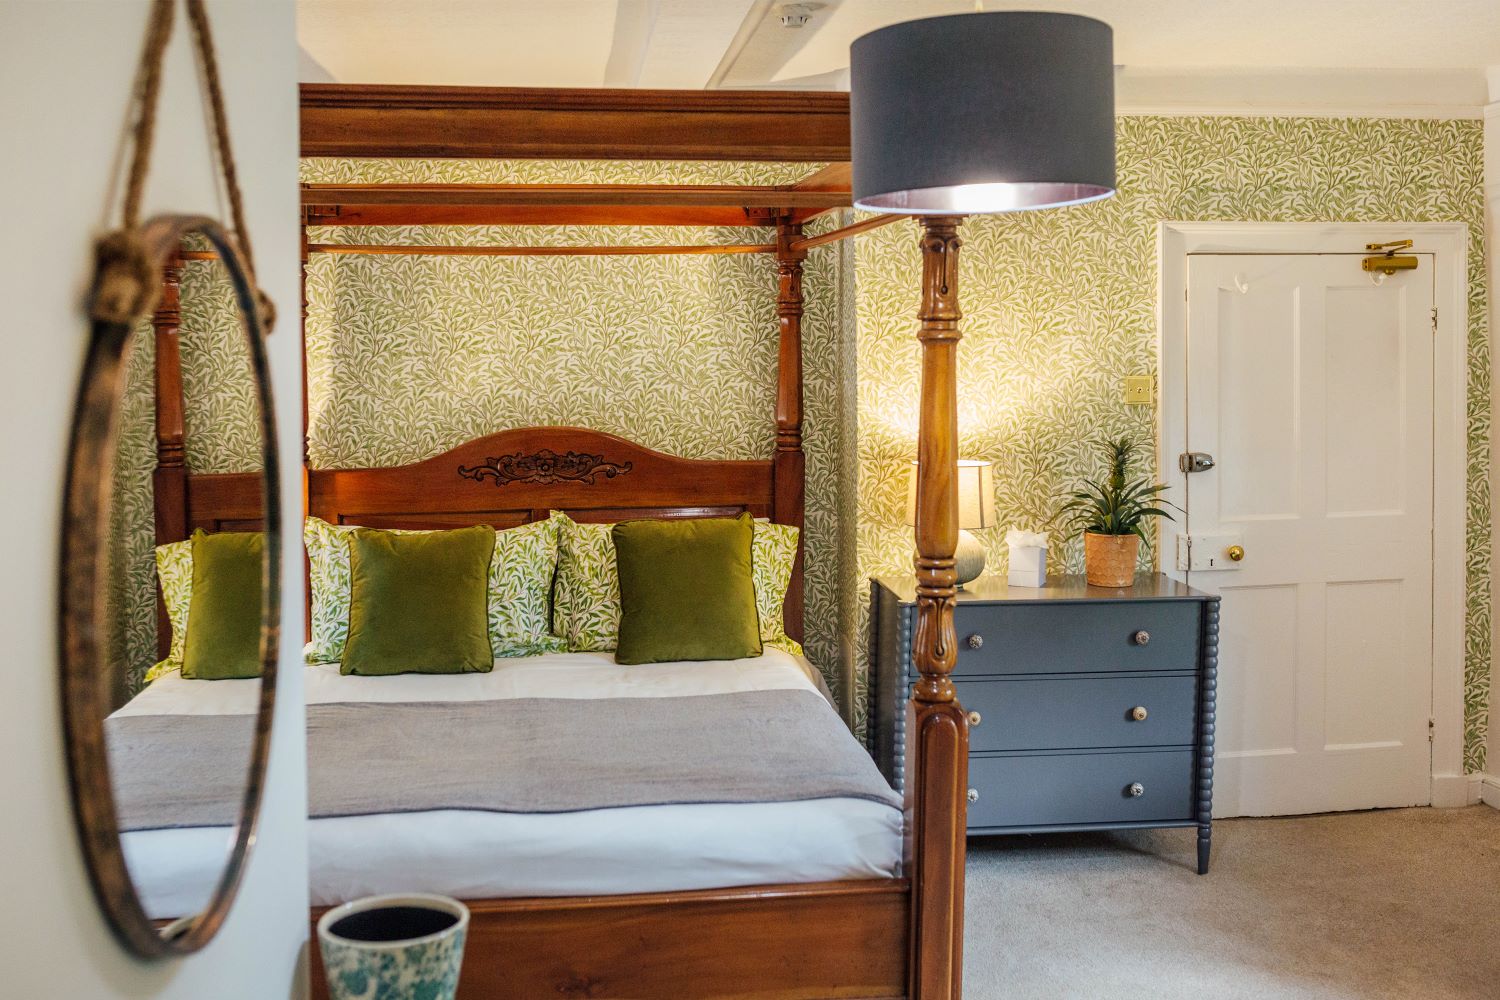 Four Poster king size bed, used as the Honeymoon Suite. Decorated in Willow themed wallpaper